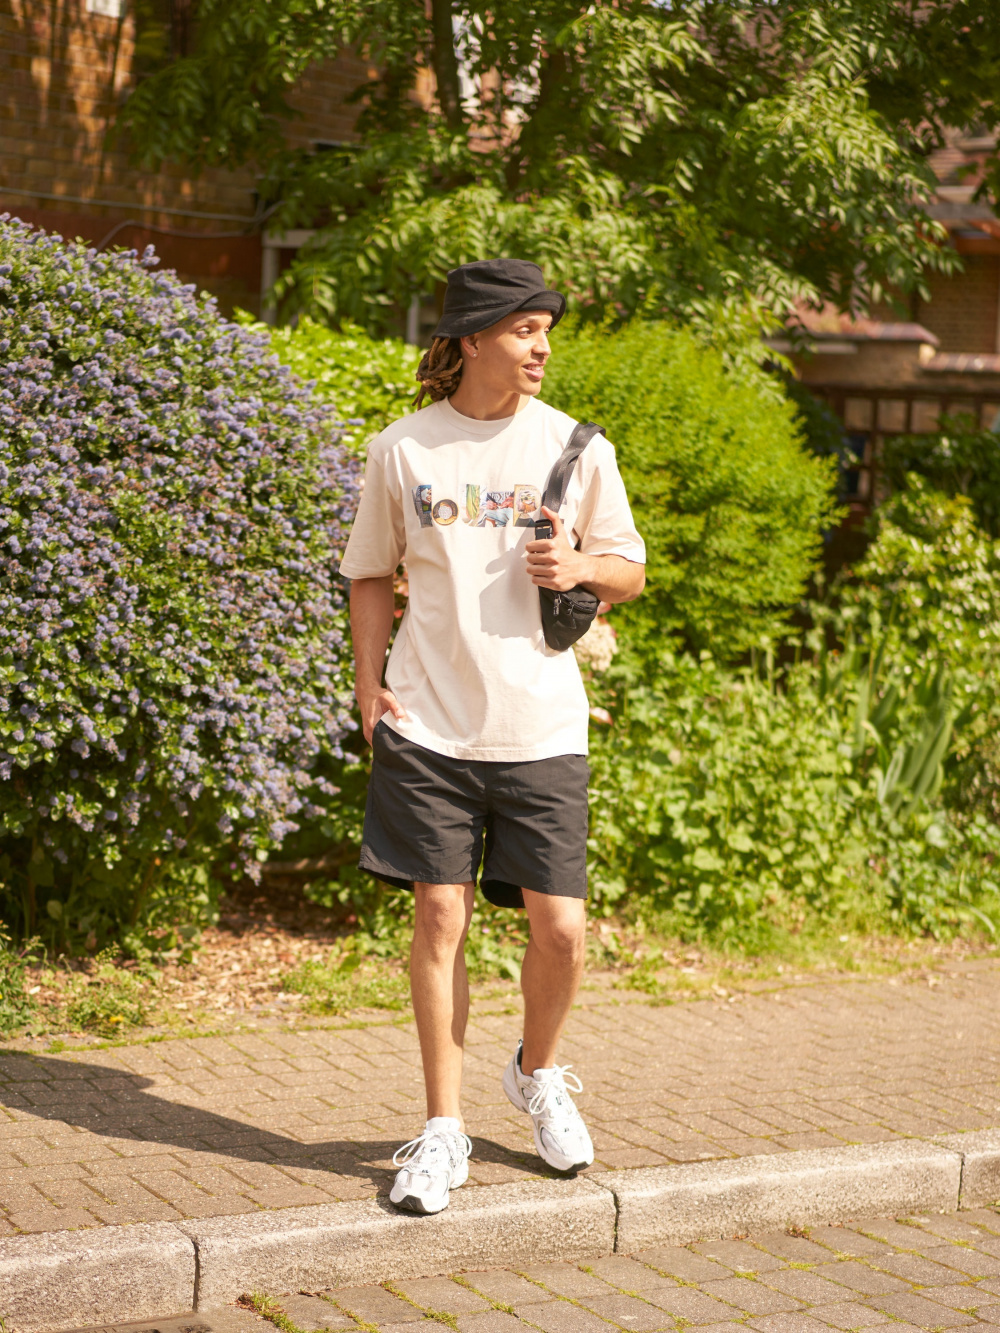 Check styling ideas for「Louvre SHORT SLEEVE UT、GEARED SHORTS (8)」